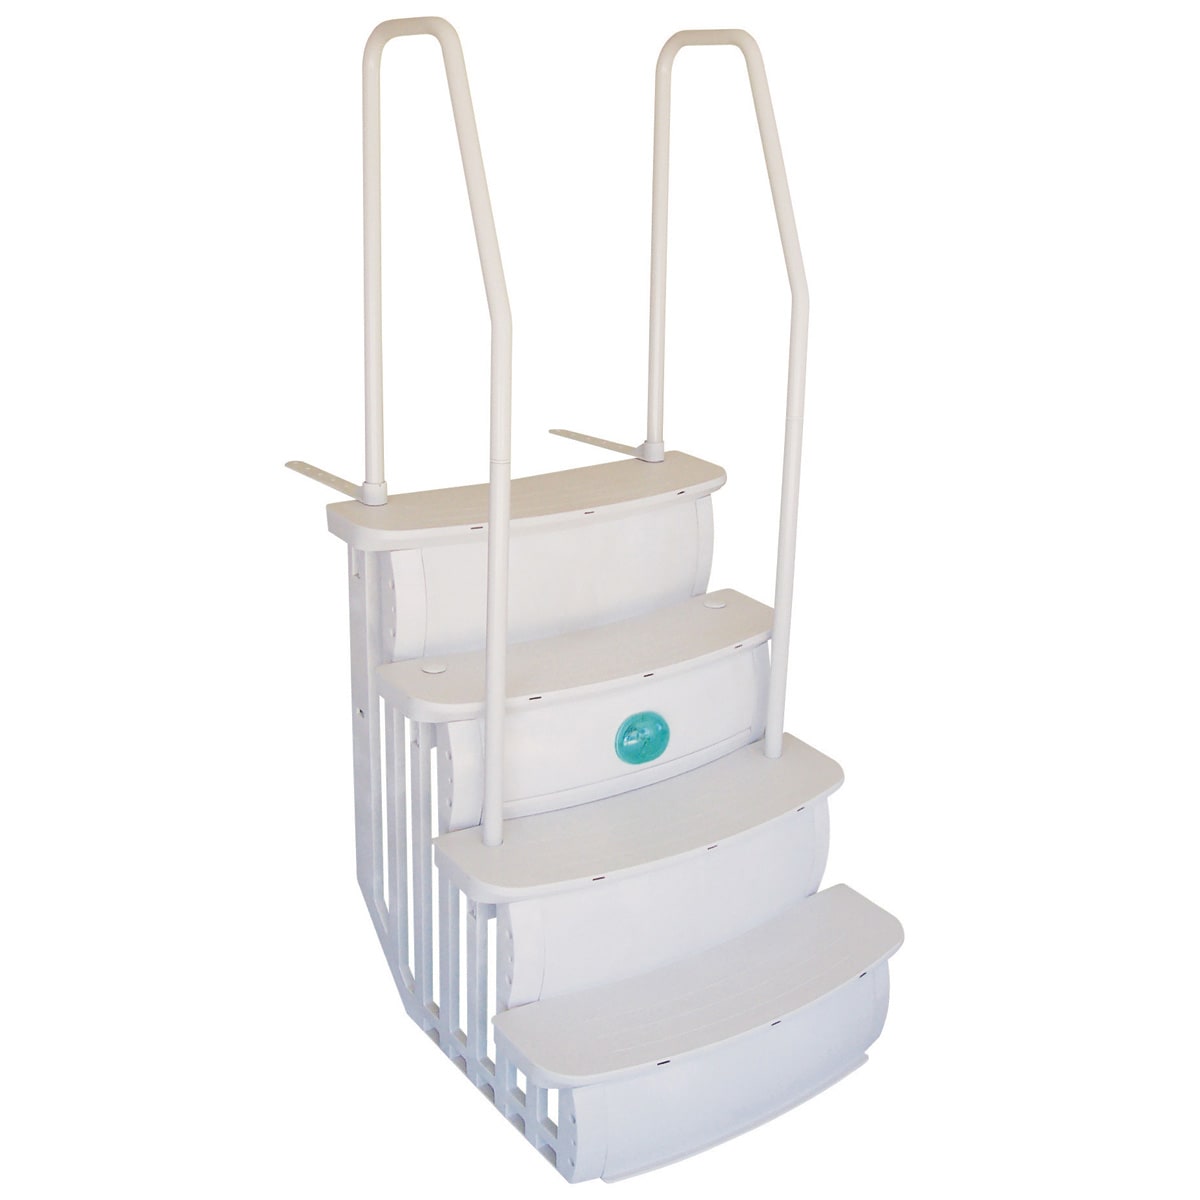 Main Access Easy Entry 36" Drop-in Step Dual Handrail | 200400T